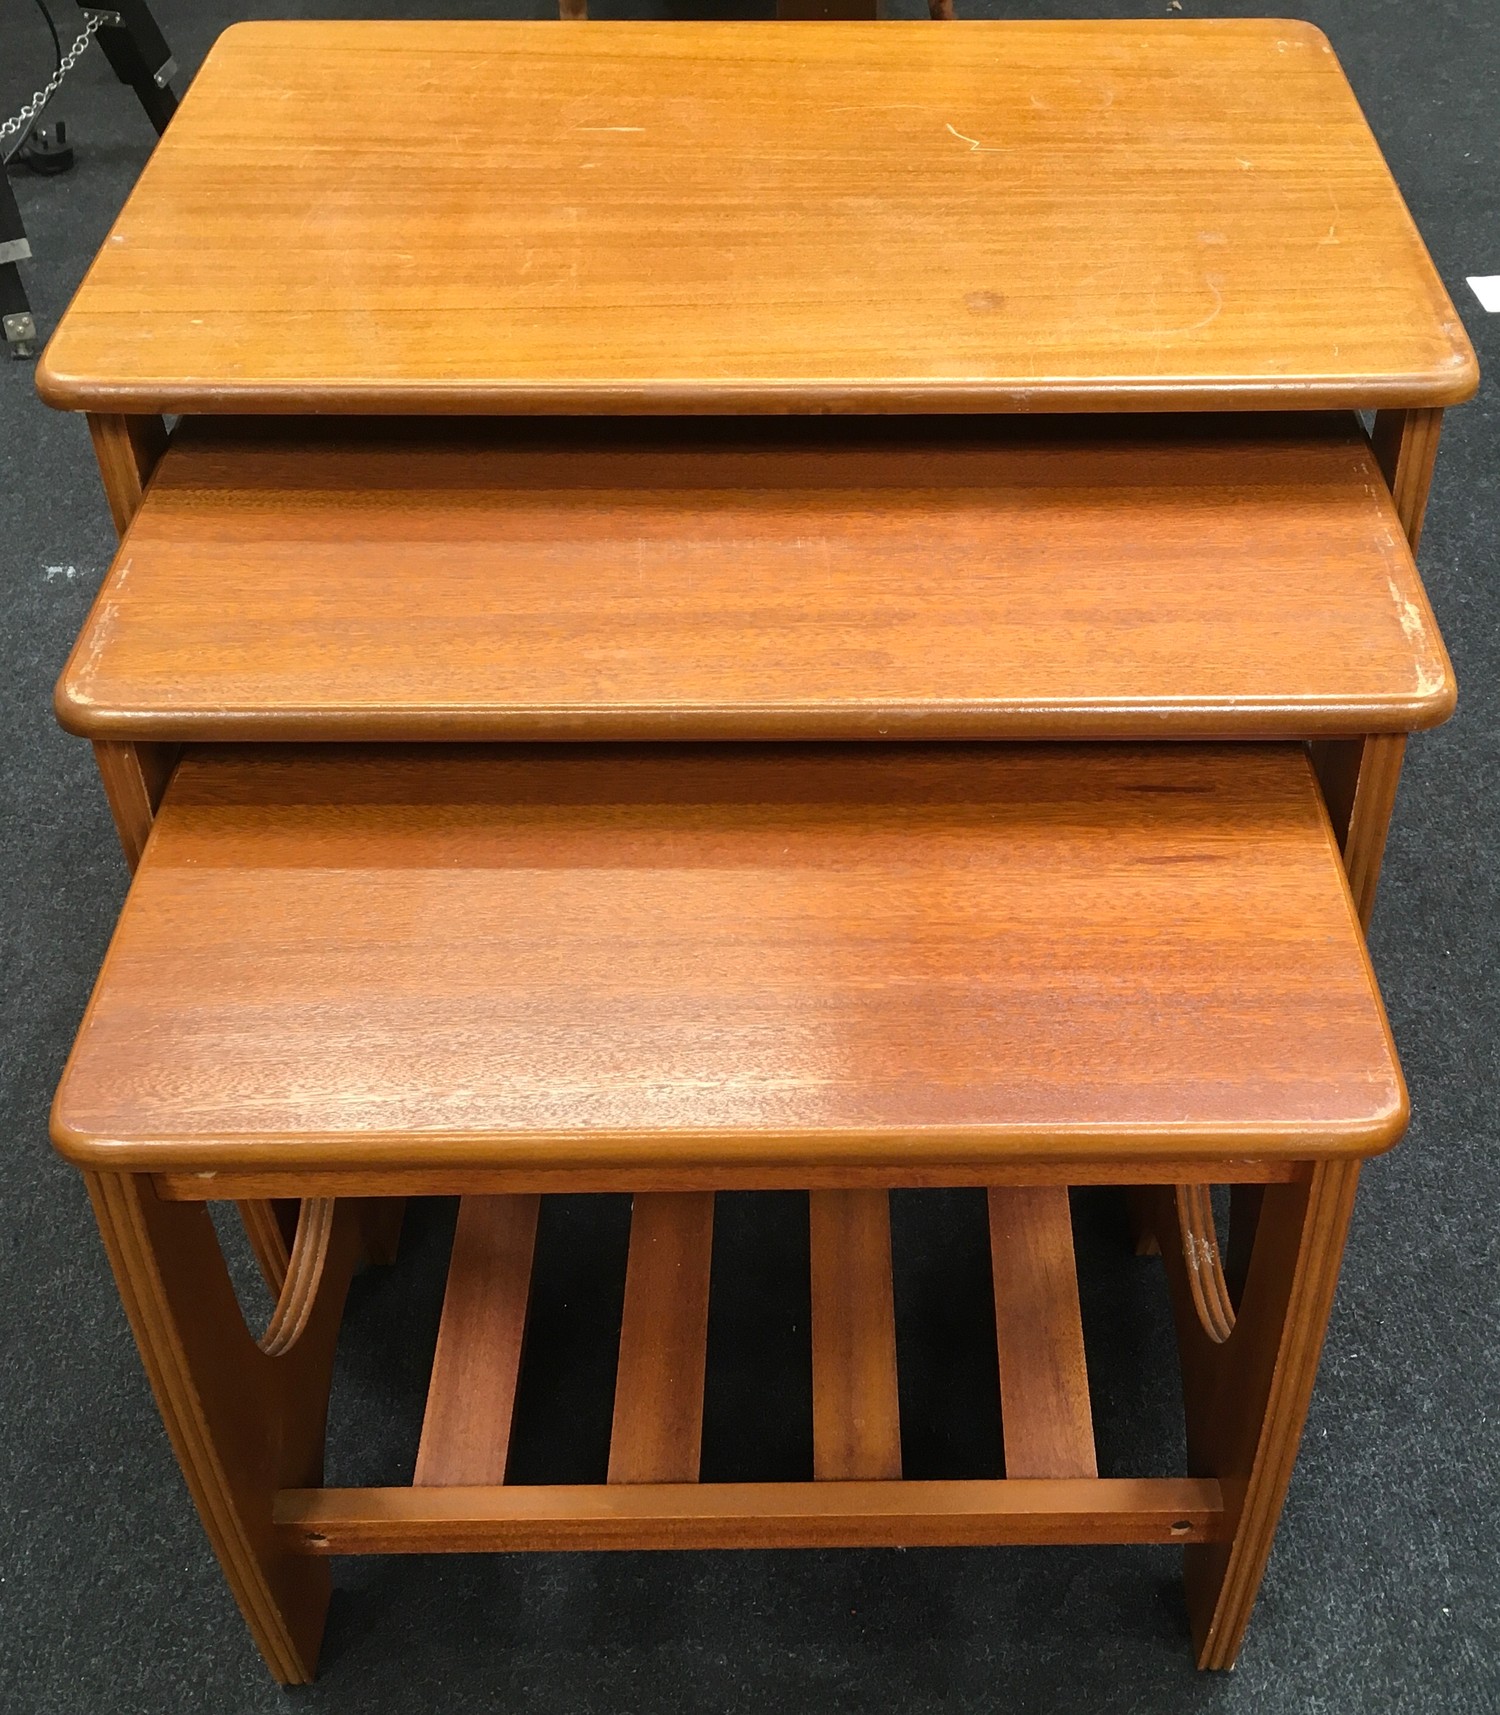 1960s nest of 3 tables in the G plan style 50x60x40cm largest